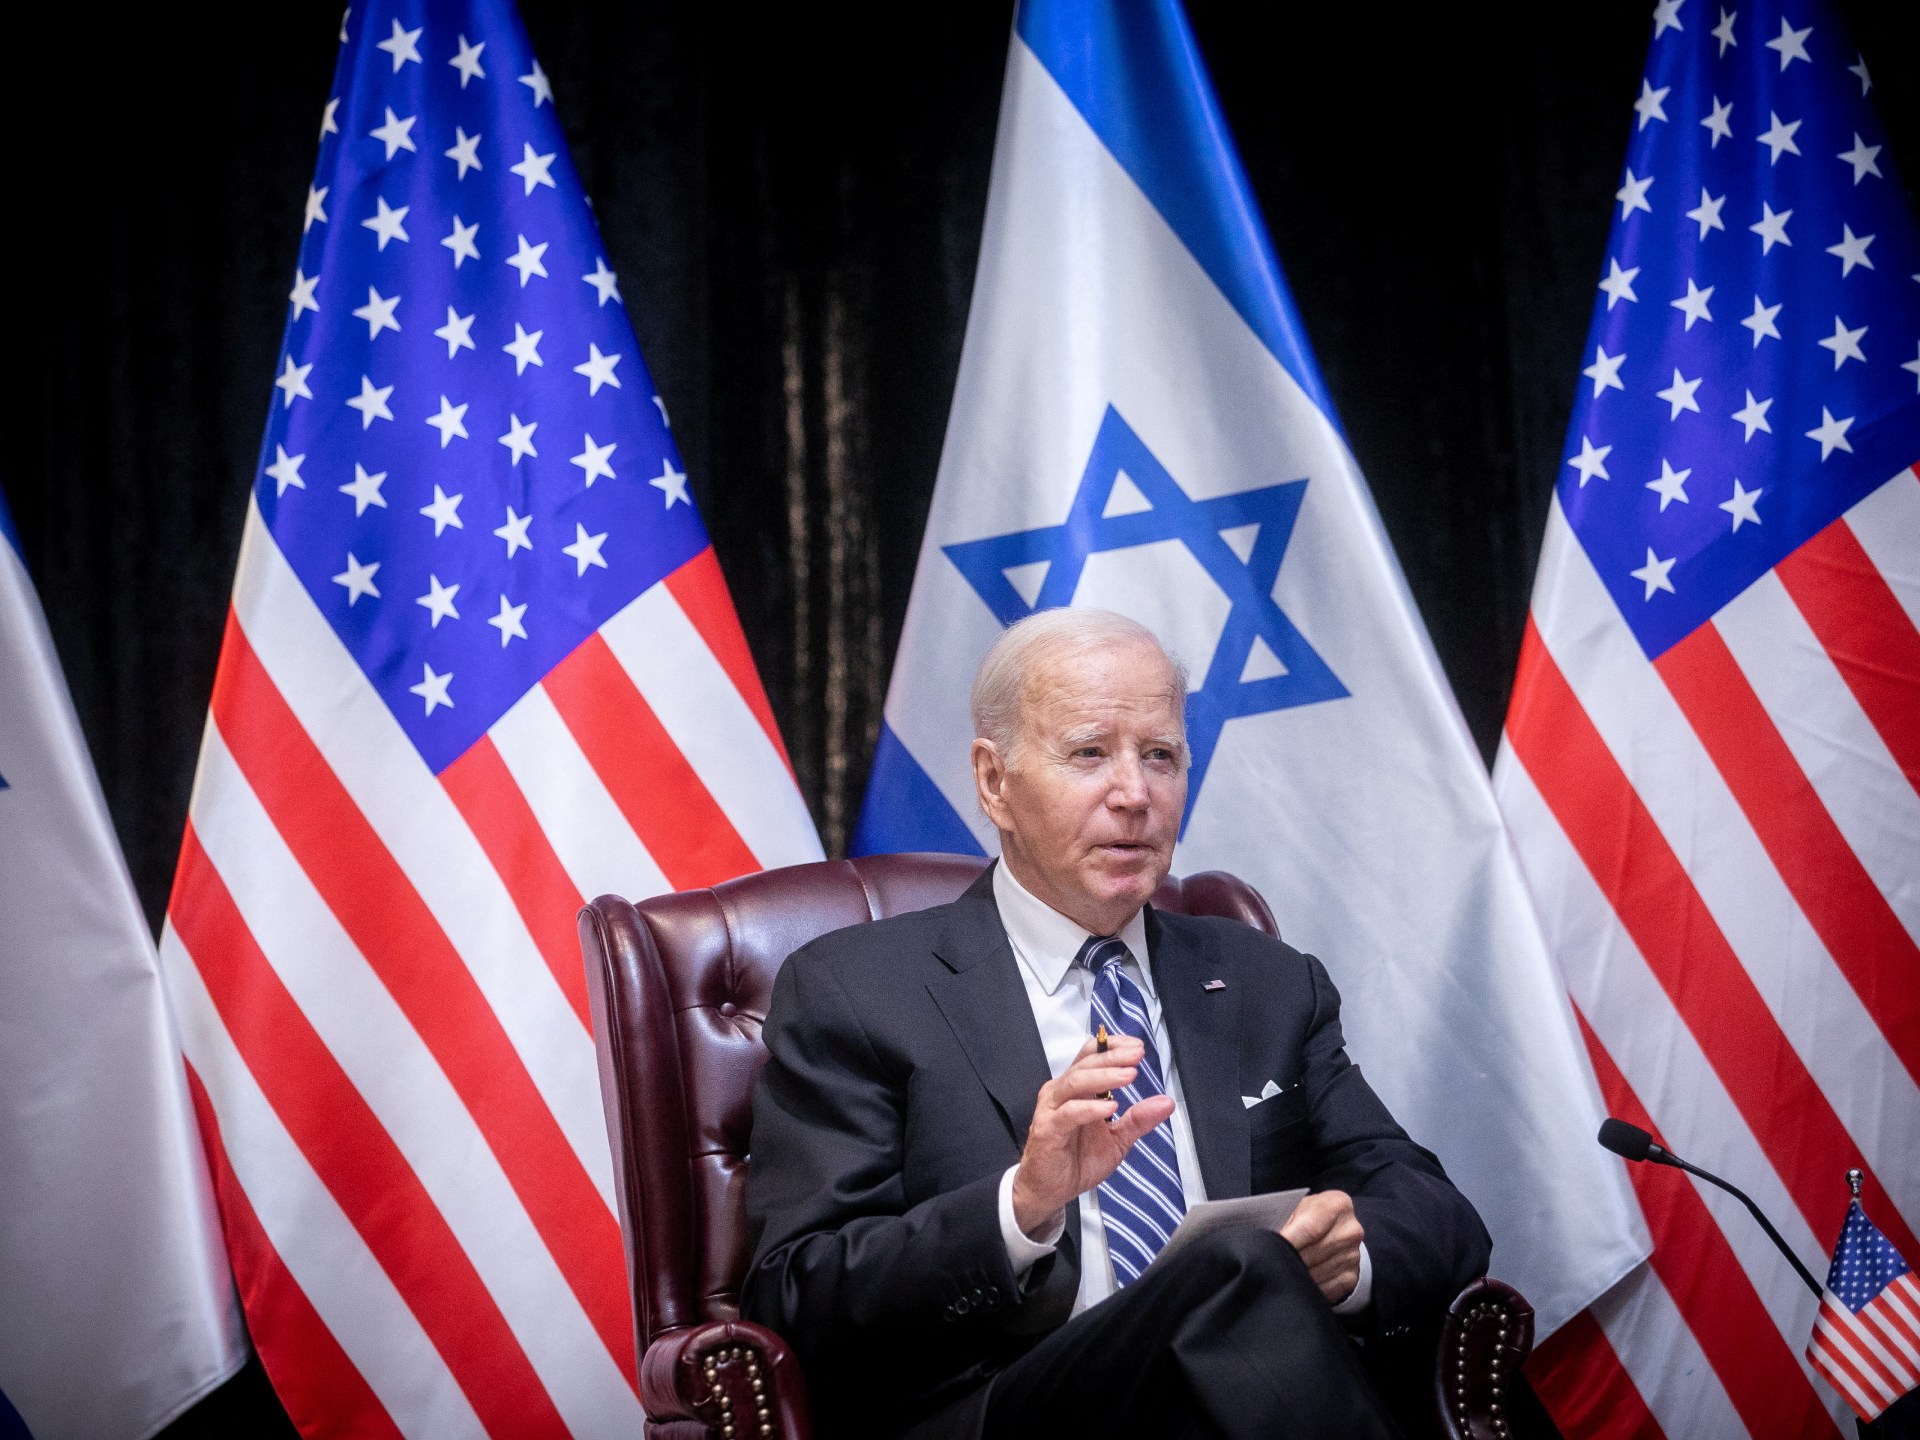 Biden rebukes Israel, says he’s ‘outraged’ over deaths of Gaza aid workers